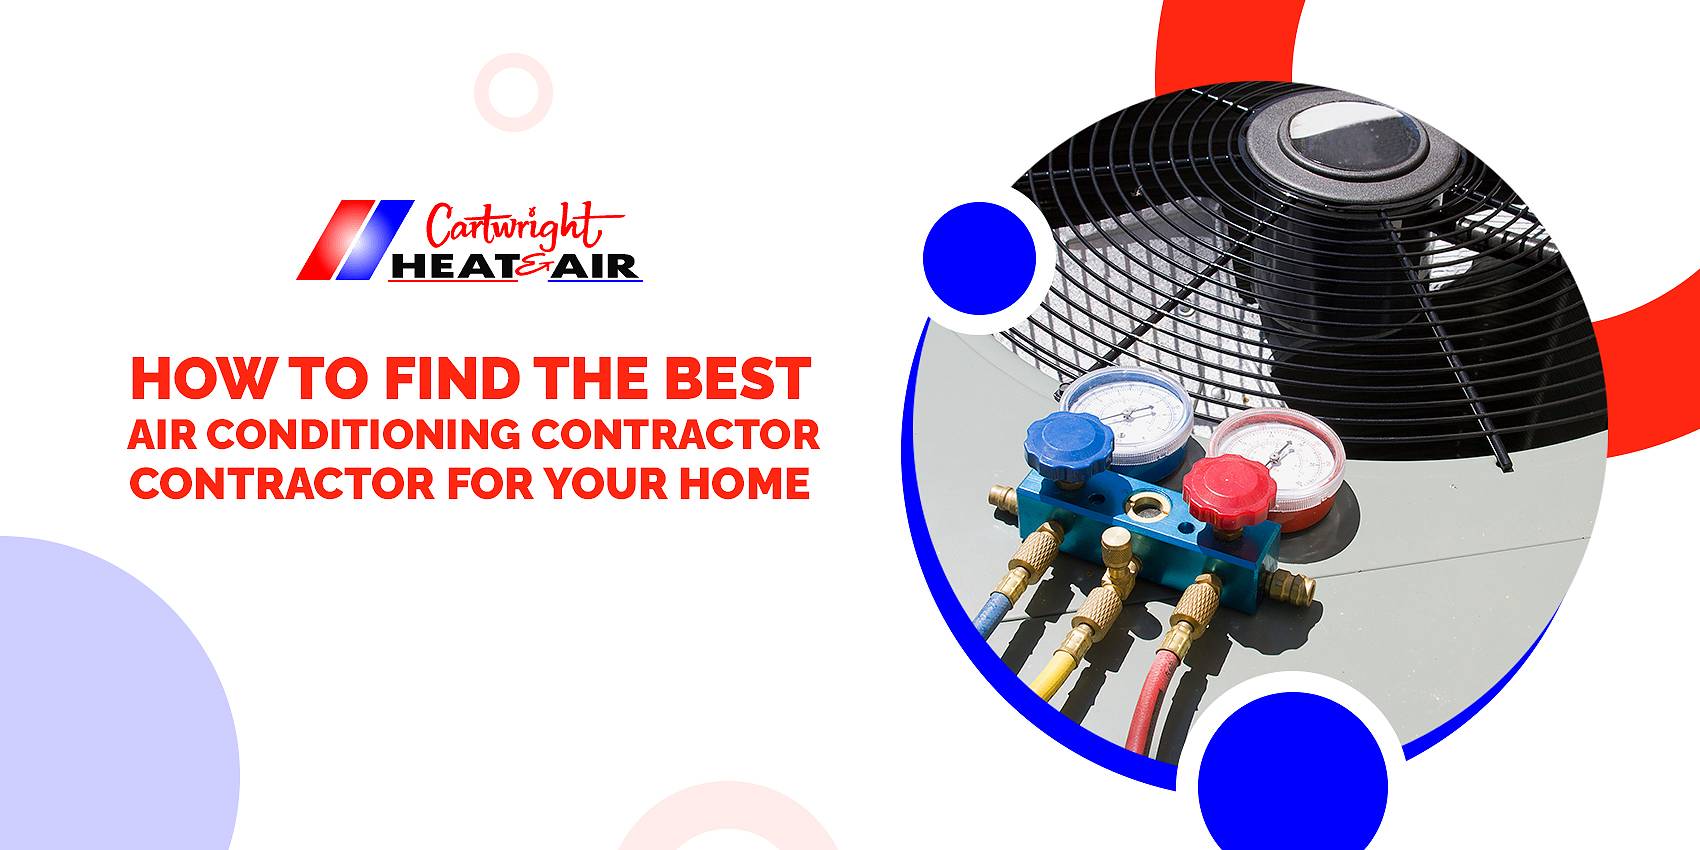 How to Find the Best Air Conditioning Contractor for Your Home by Cartwright heat and air